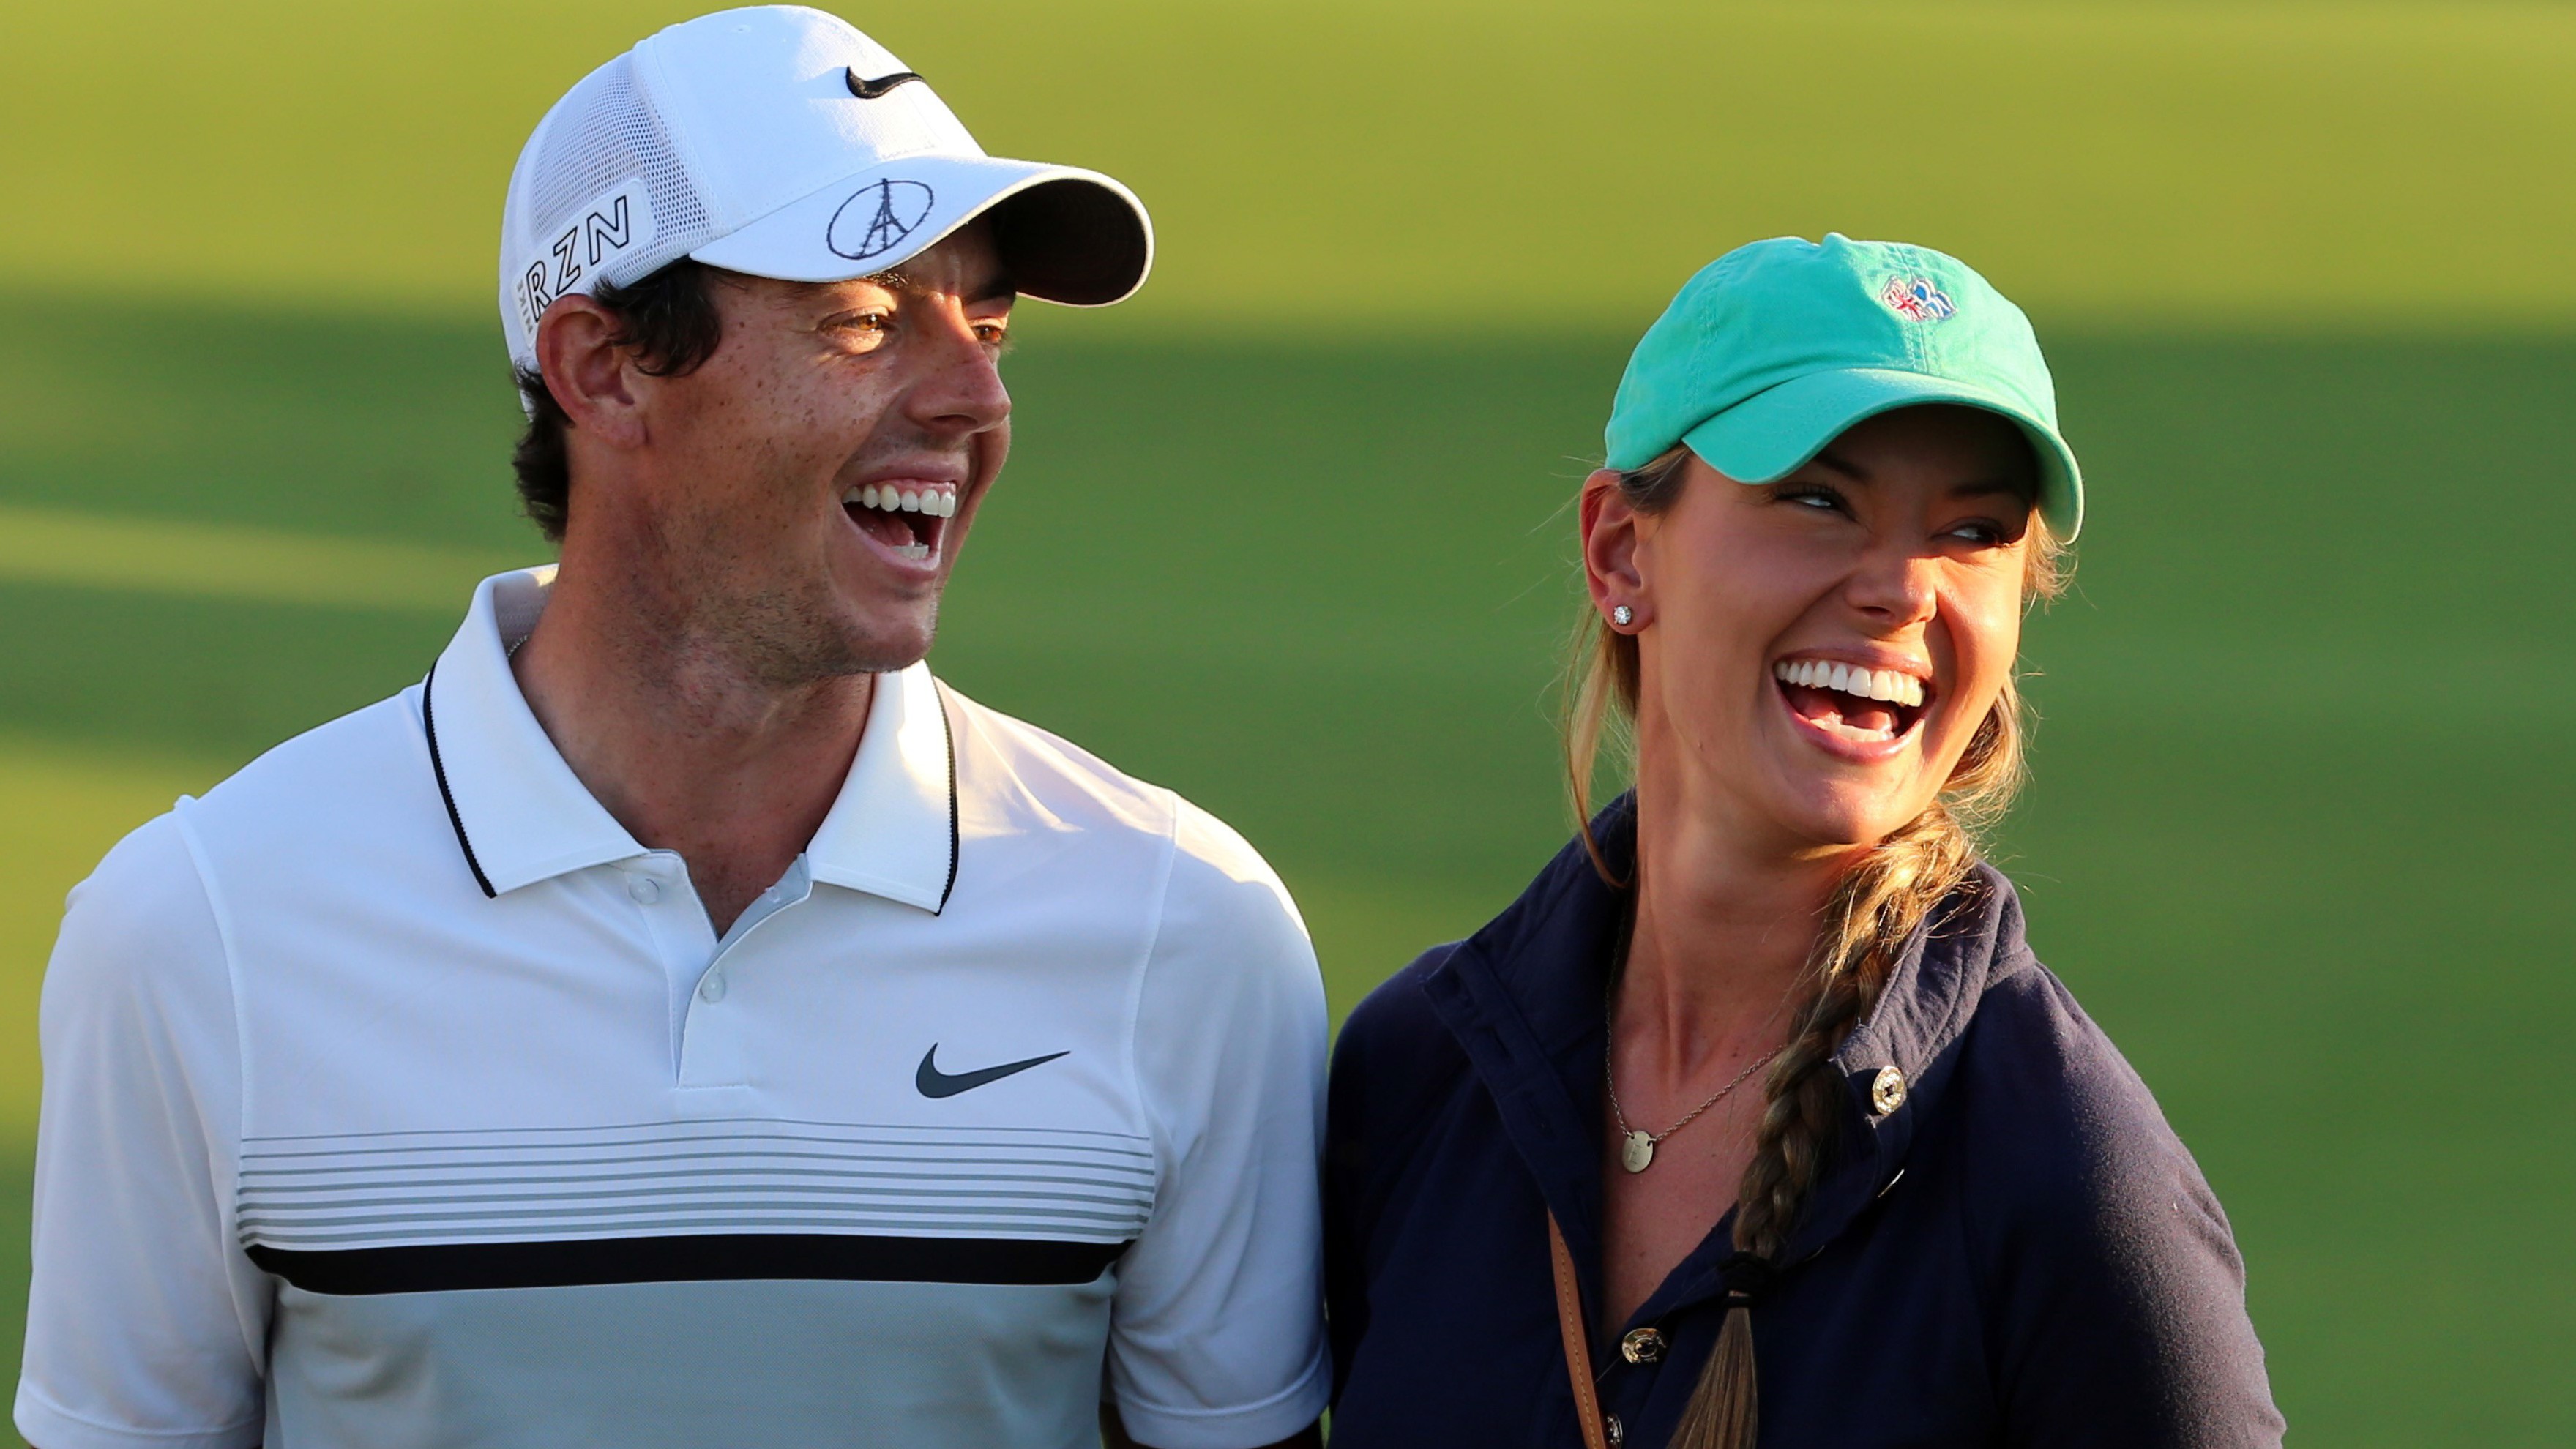 Erica Stoll, Rory McIlroy's Fiancee 5 Fast Facts You Need to Know